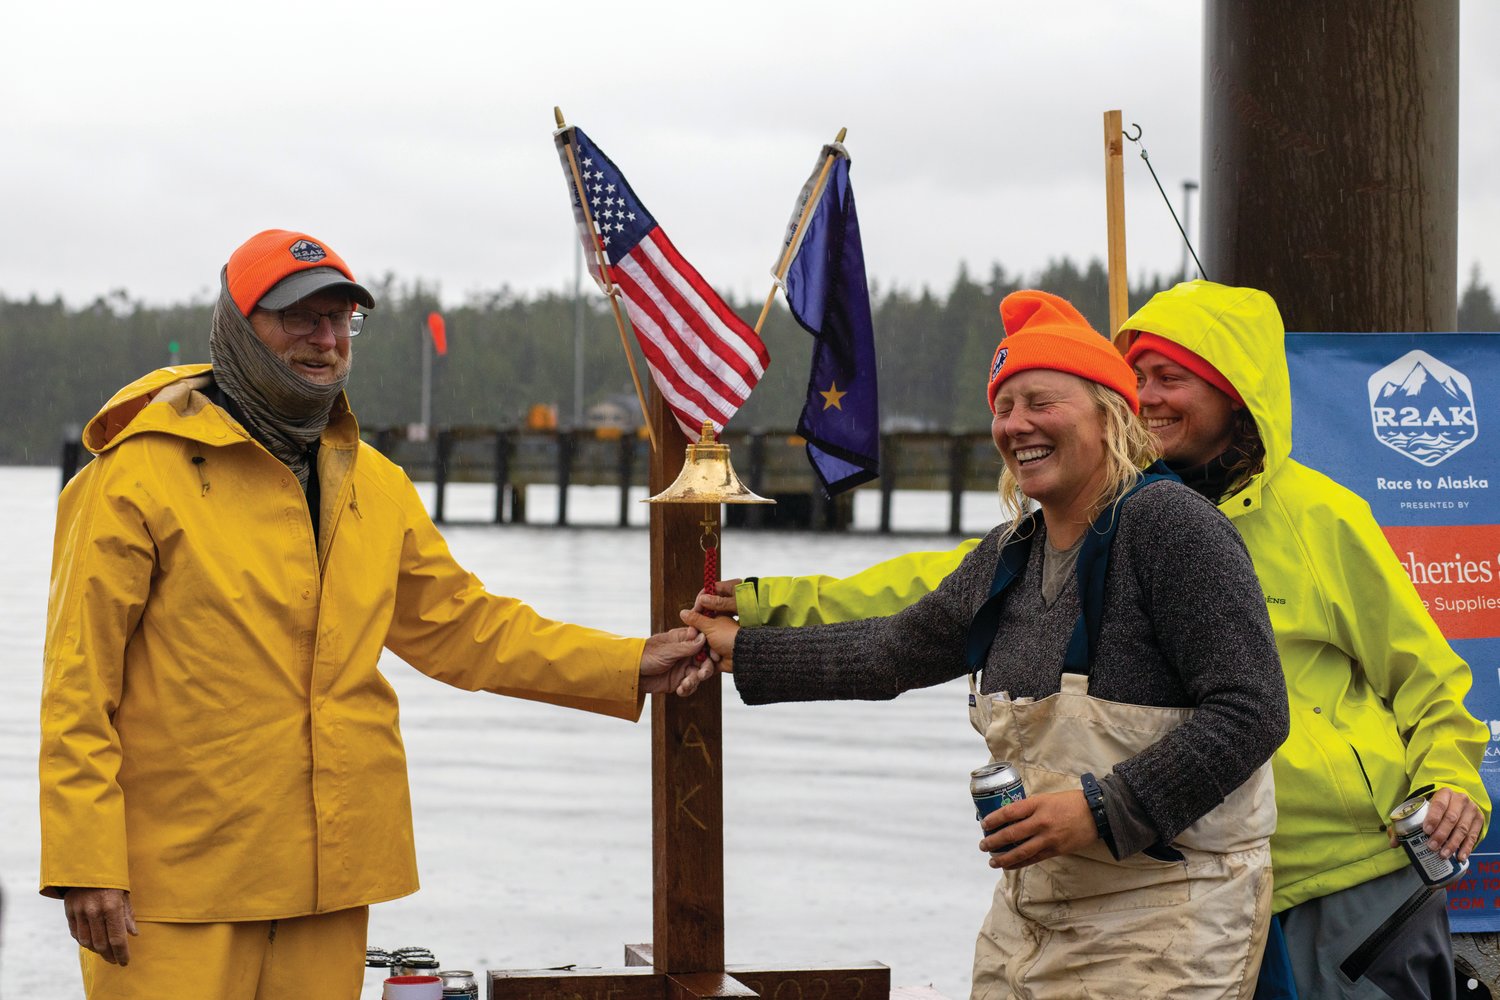 Members of Team Sockeye Voyages celebrate in Ketchikan, Alaska after finally reaching the finish line in the 2022 Race to Alaska.